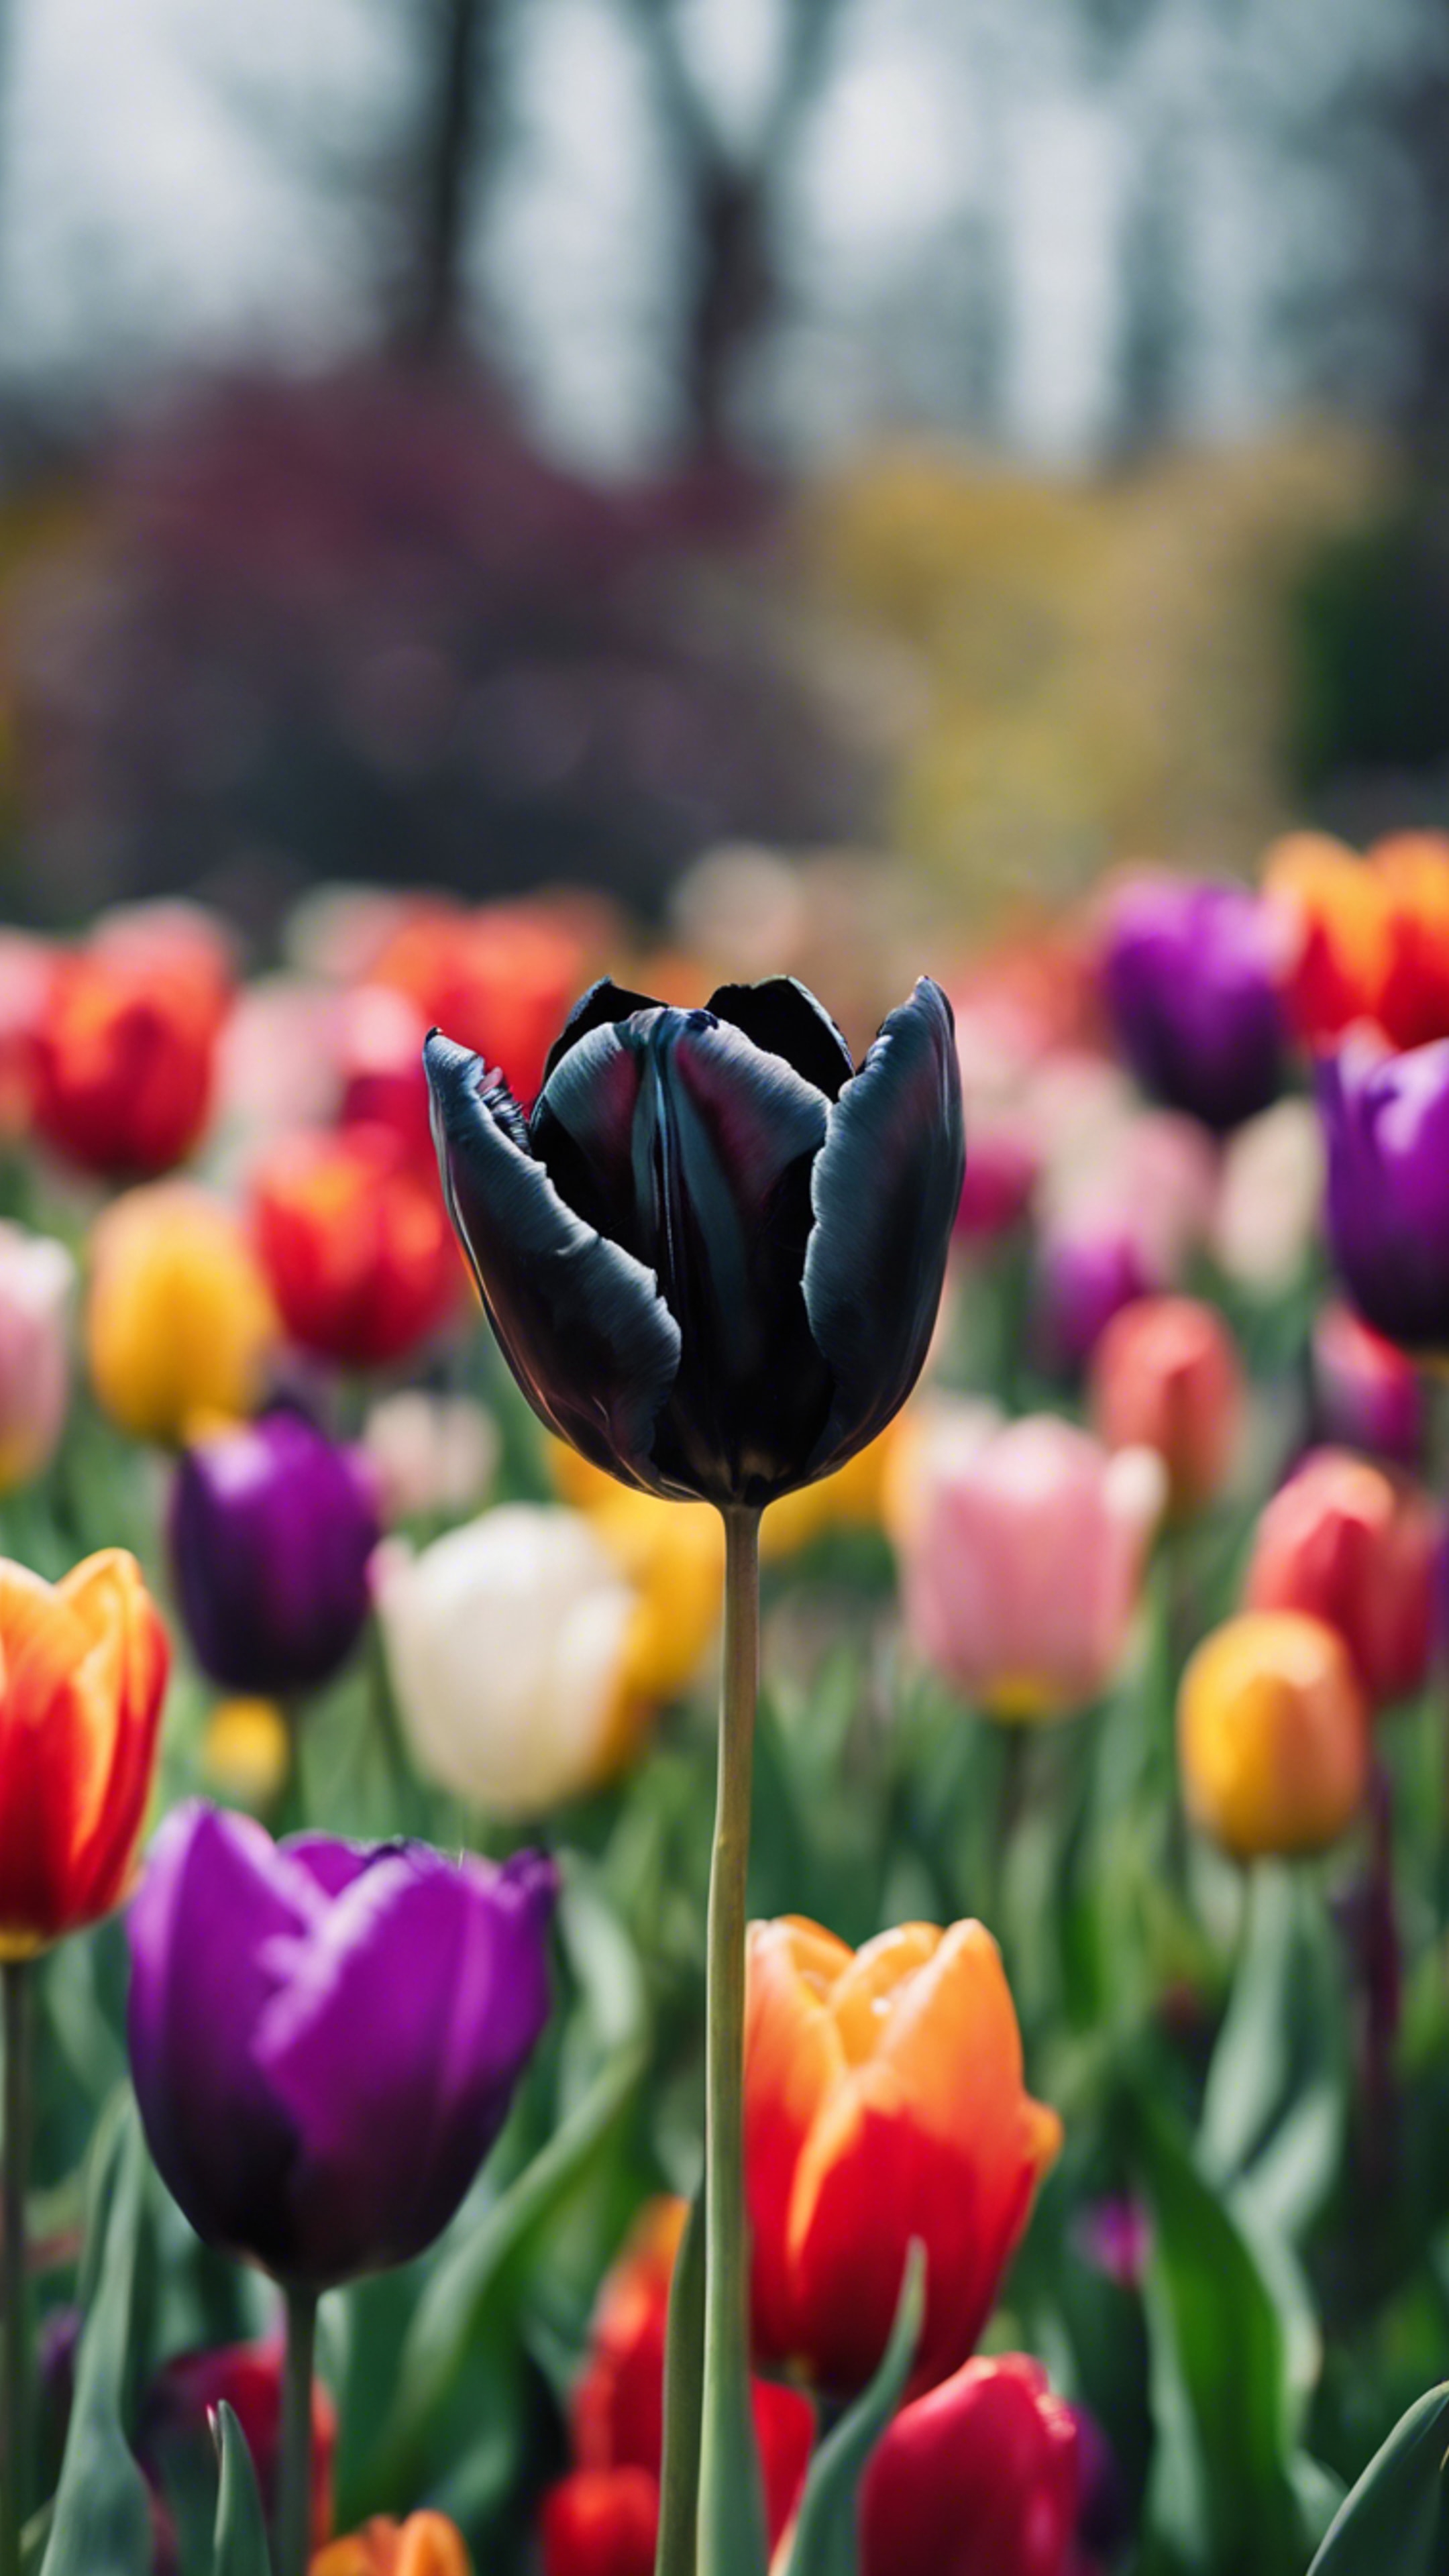 A delicate black tulip, standing out dramatically among a vibrant spray of multicolored tulips in a spring garden. Tapet[60dfa6a8a46243228945]